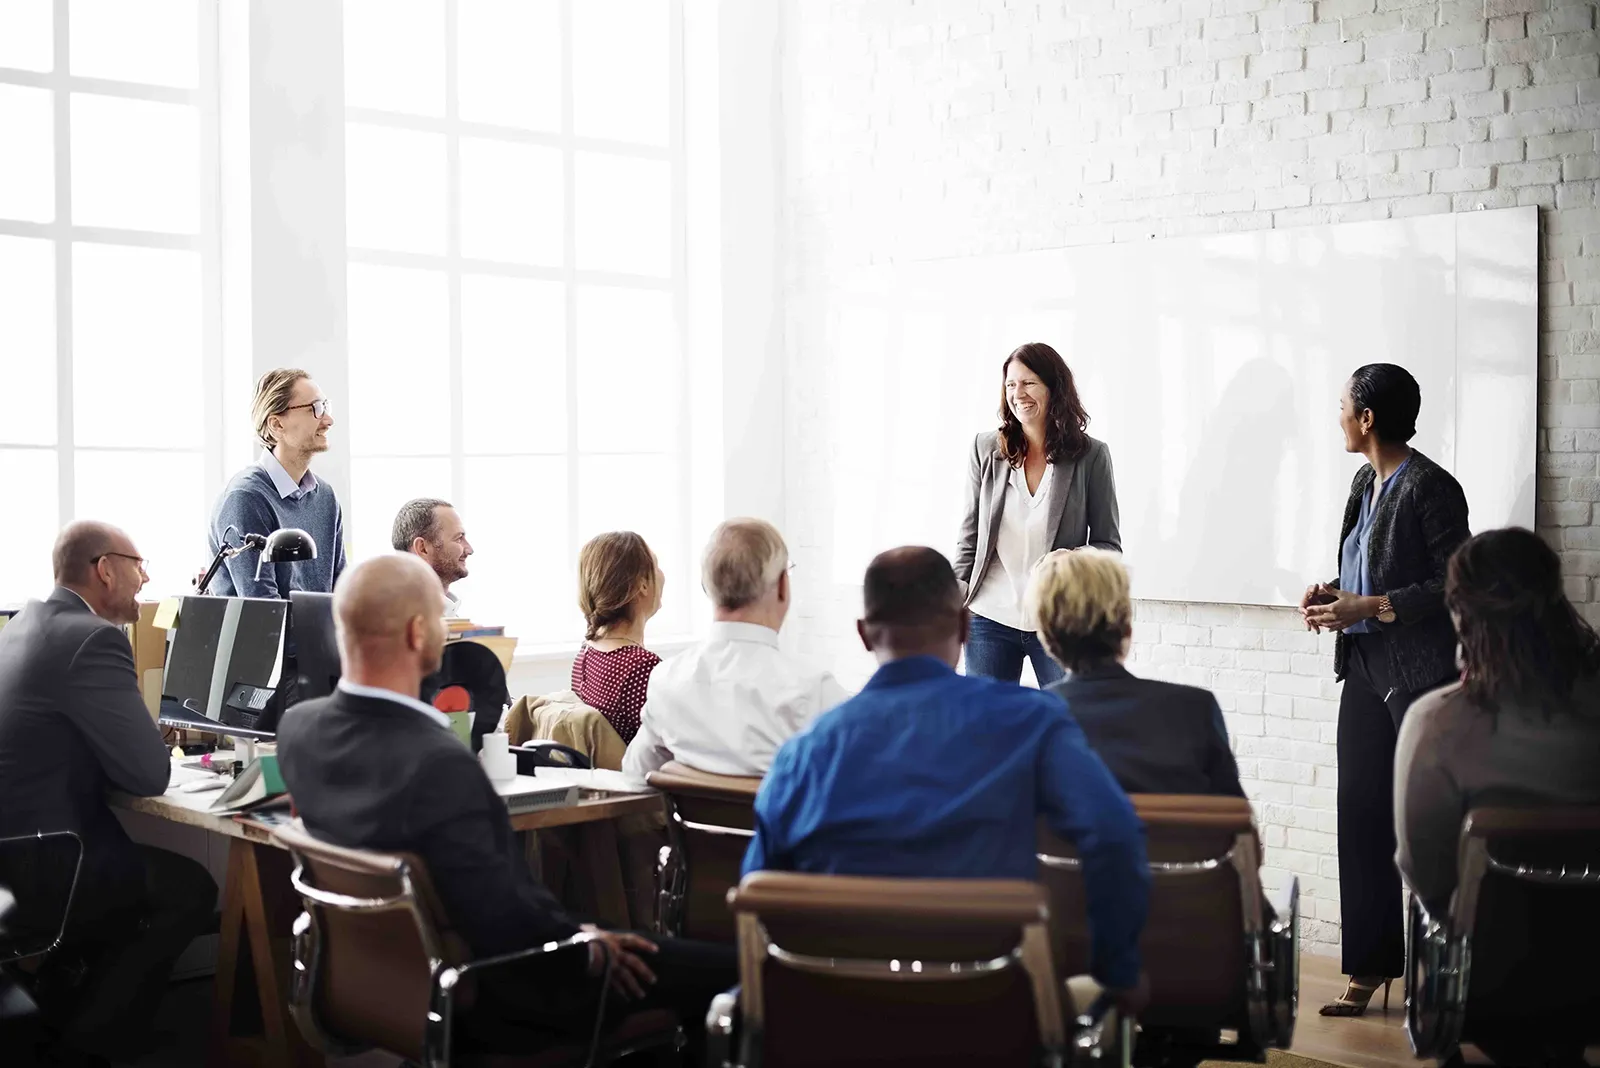 Image of a group of people having a meeting in a professional office setting